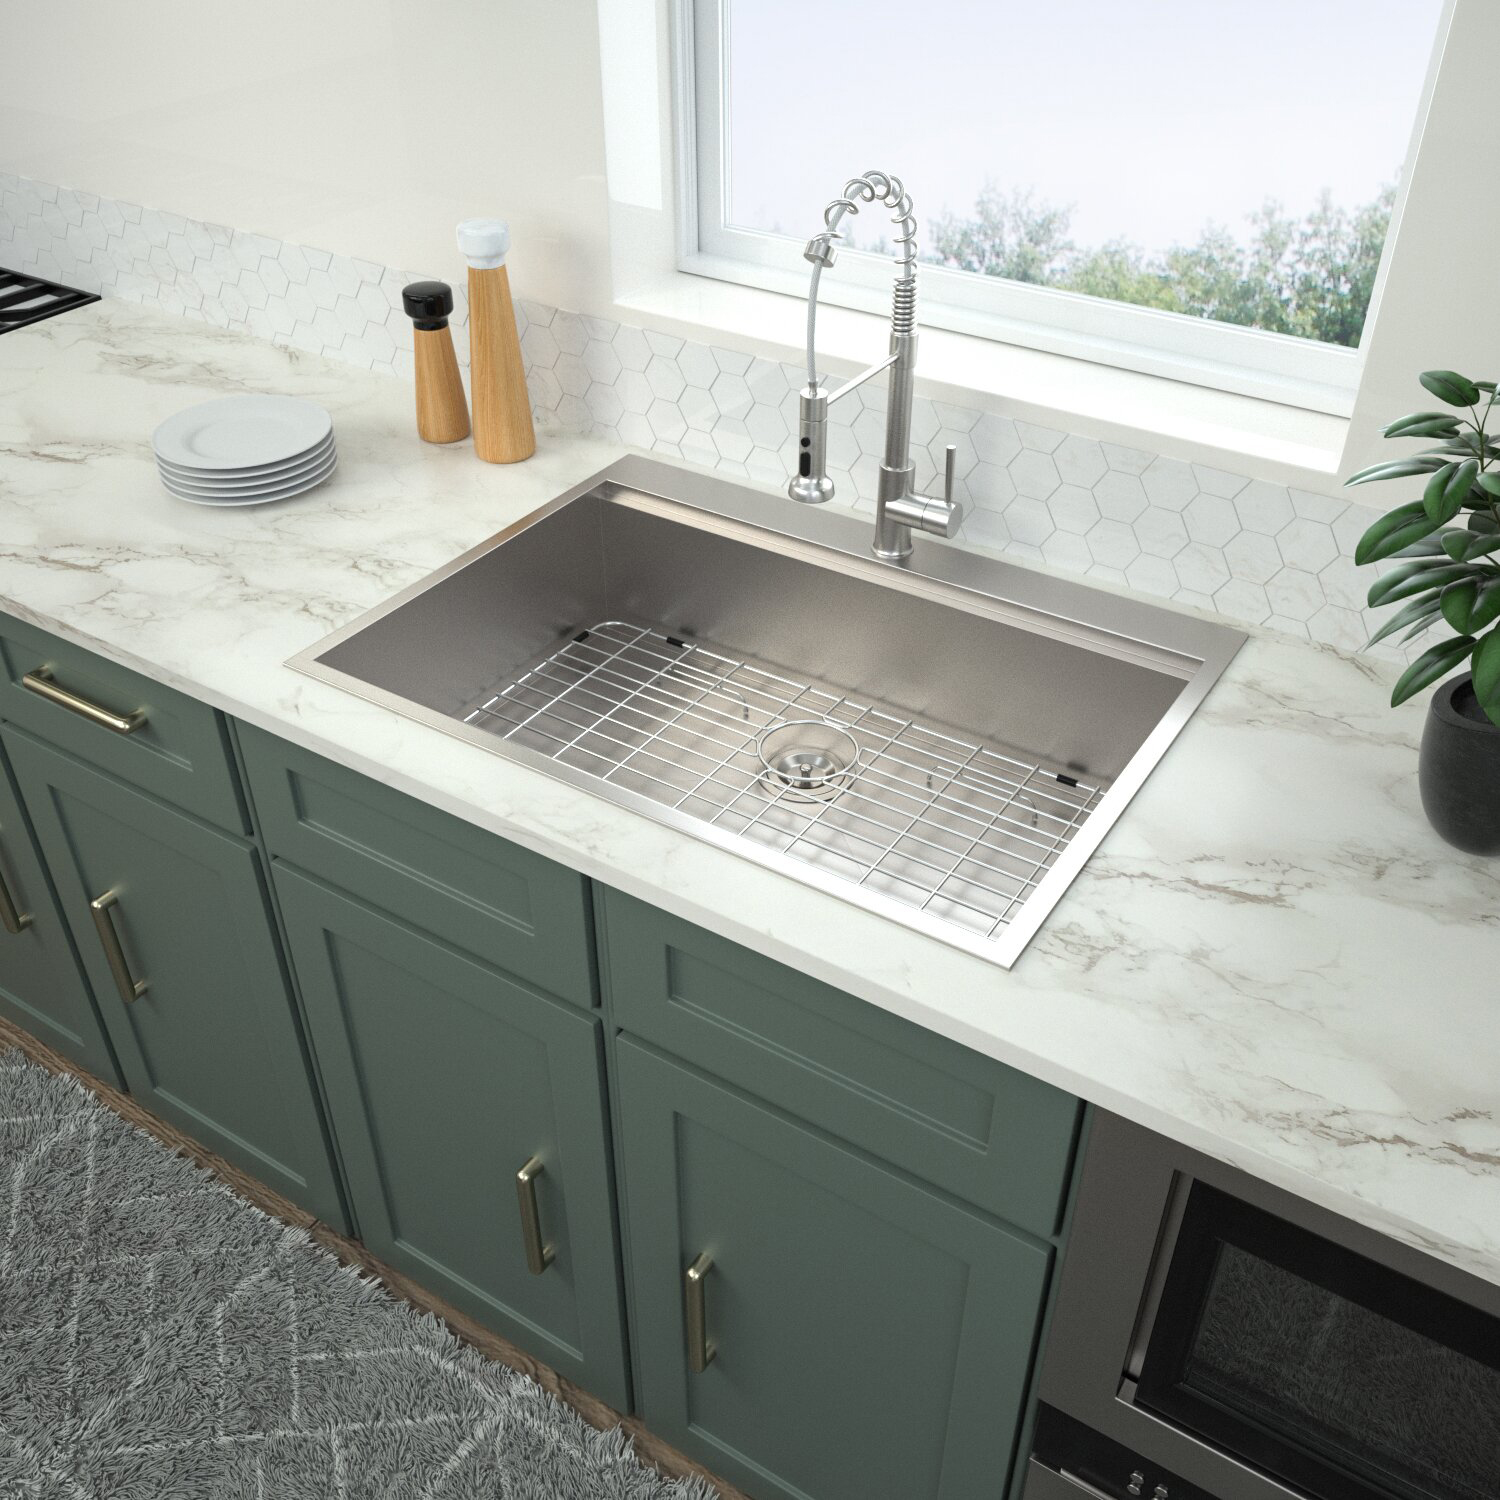 What are the factors to consider when selecting the right finish for your kitchen faucet?